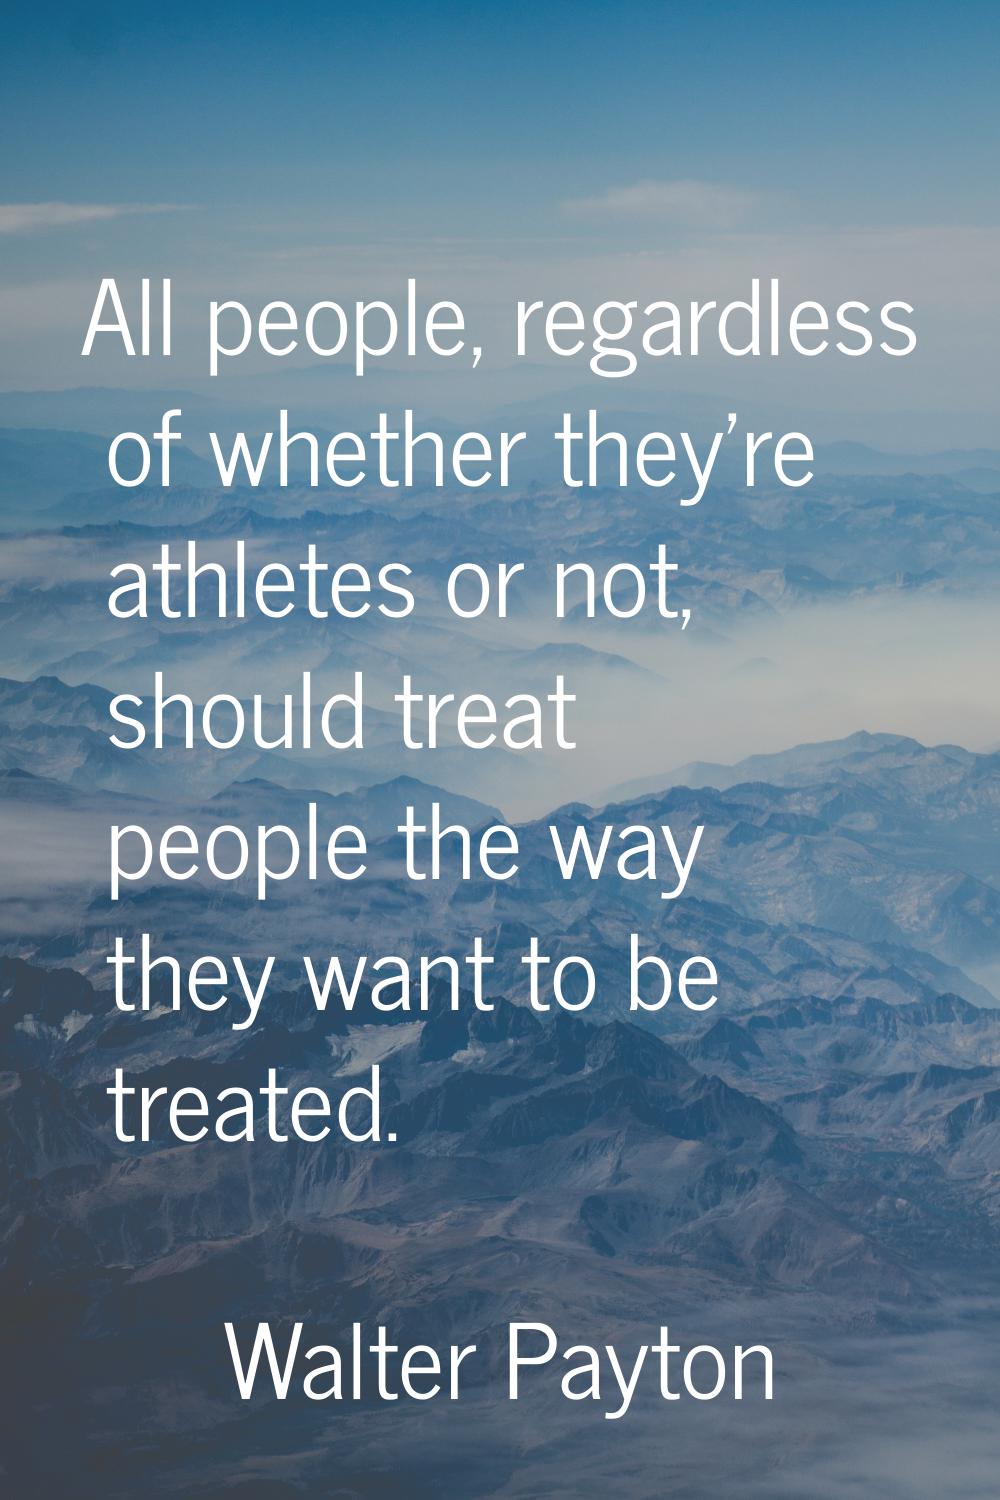 All people, regardless of whether they're athletes or not, should treat people the way they want to